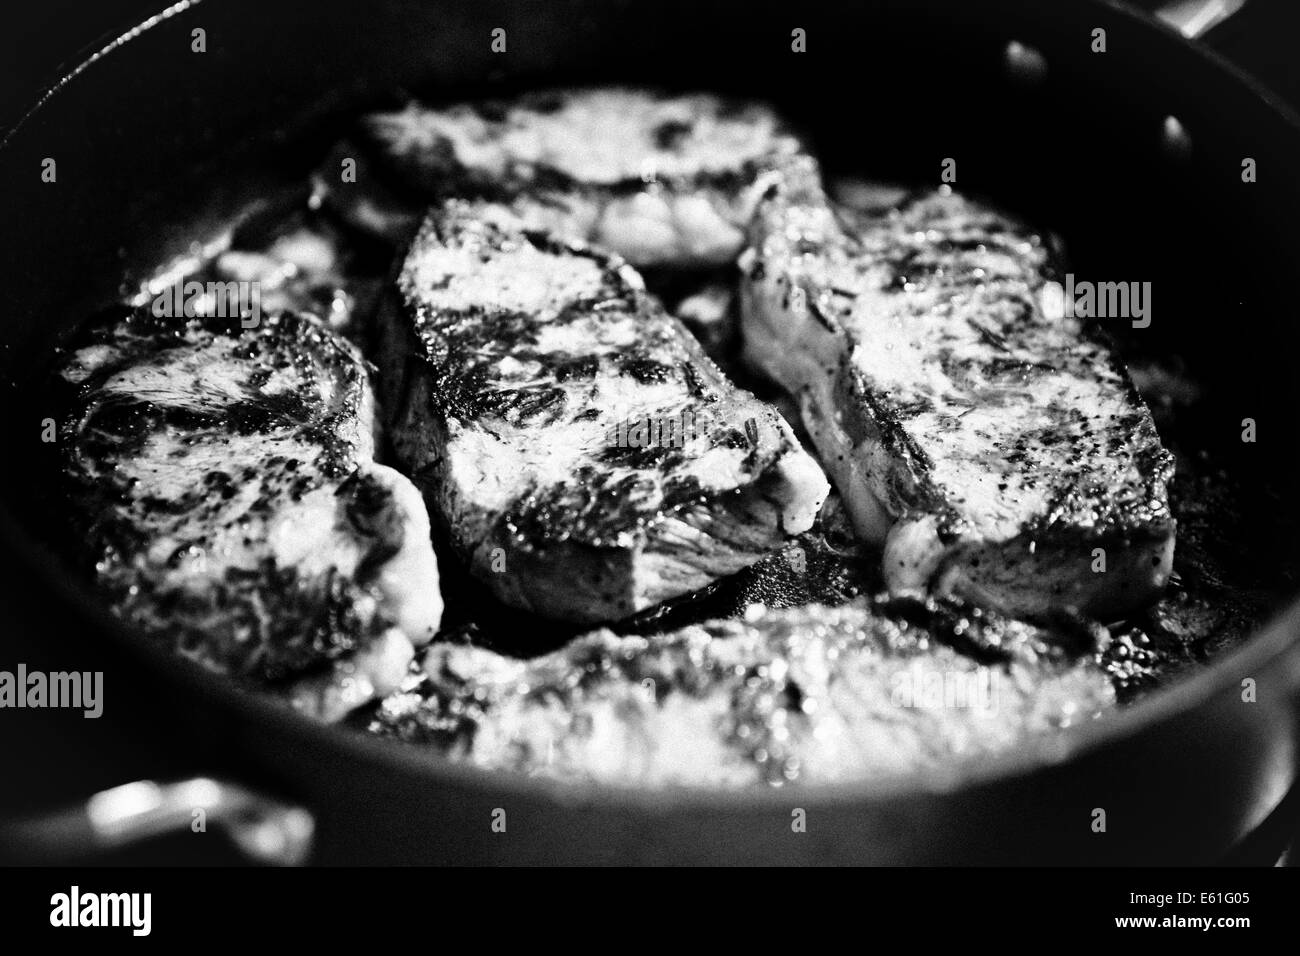 Grilled steak pan cooked meat beef close up fried Stock Photo